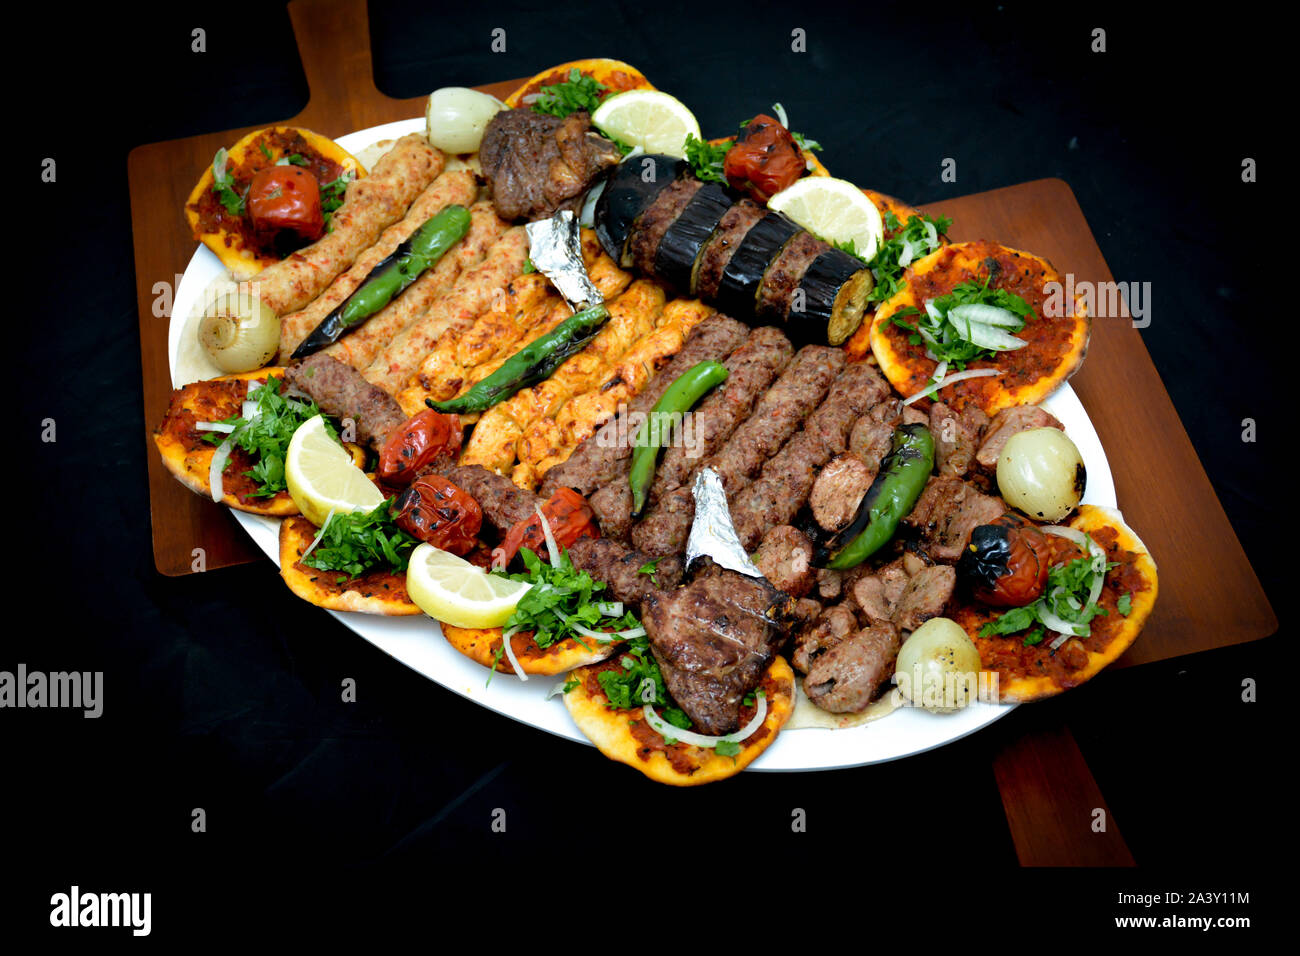 Plate of Traditional arab eastern meal - selections of kebabs Stock Photo